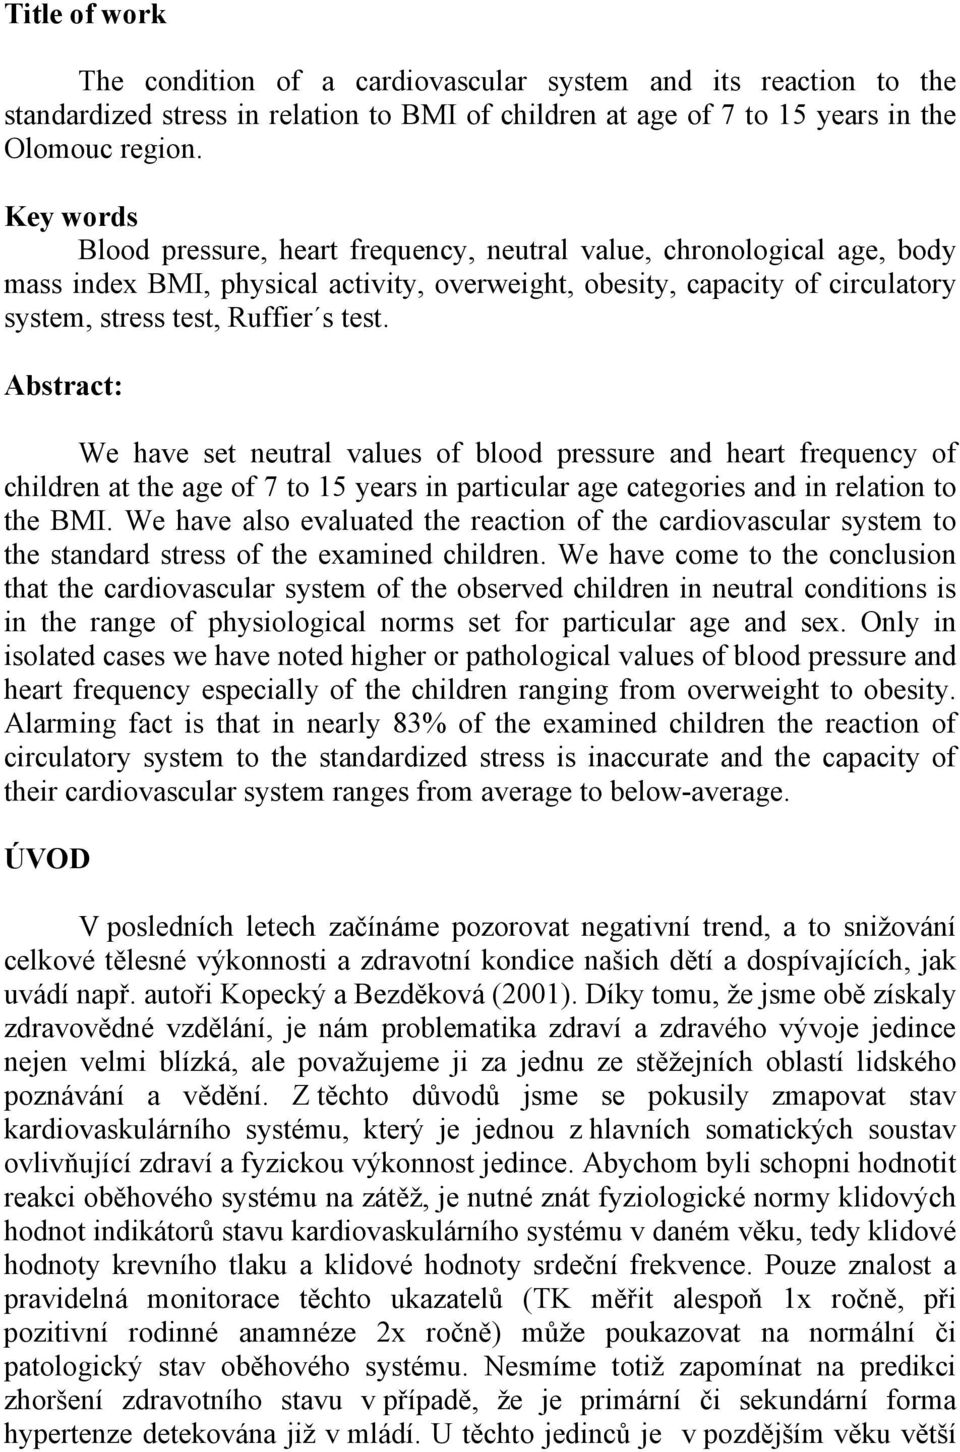 Abstract: We have set neutral values of blood pressure and heart frequency of children at the age of 7 to 15 years in particular age categories and in relation to the BMI.